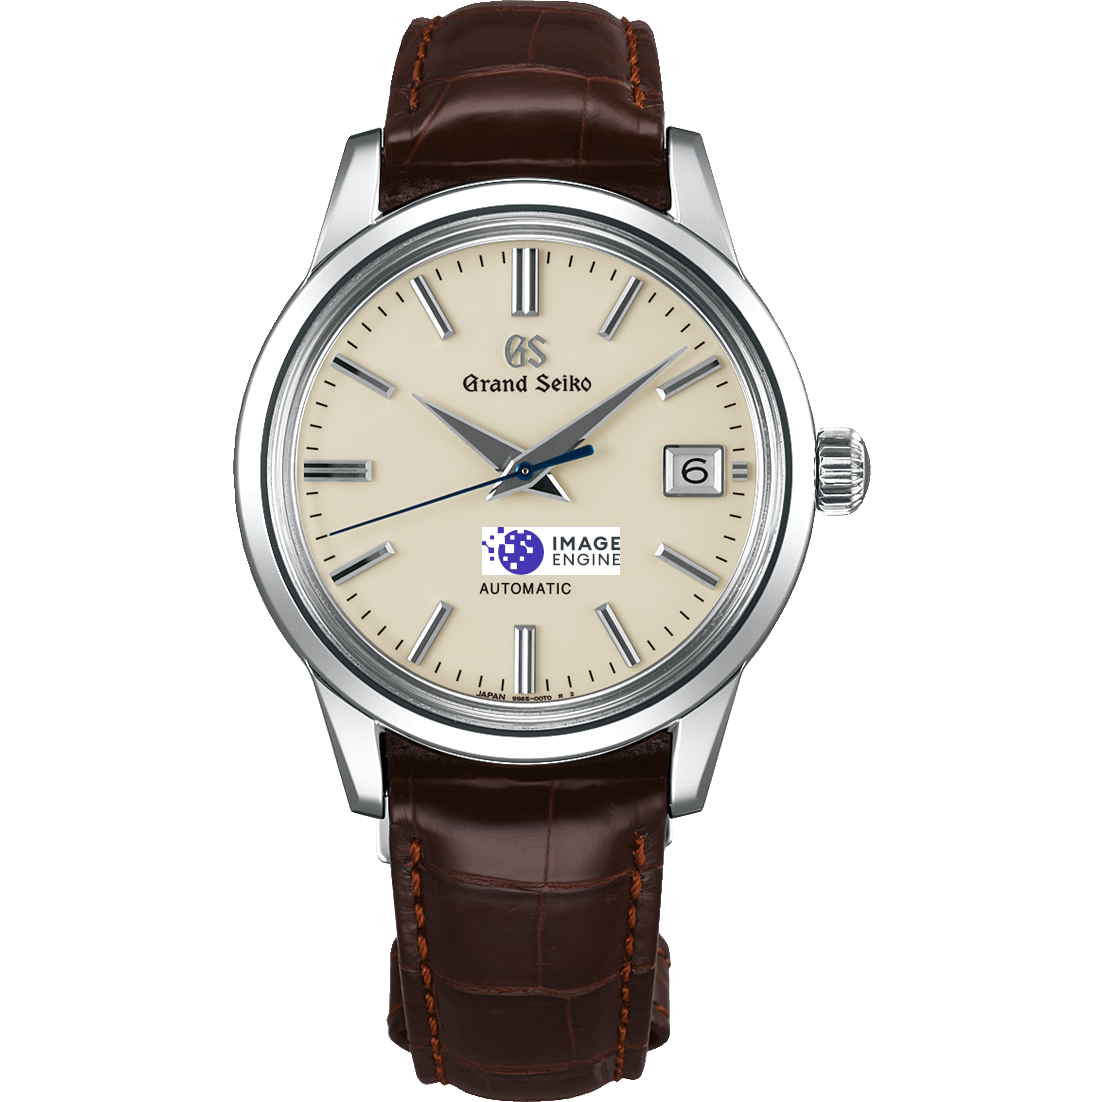 SBGR261G - A Classic and Elegant 3-day Automatic – GRAND SEIKO INDIA